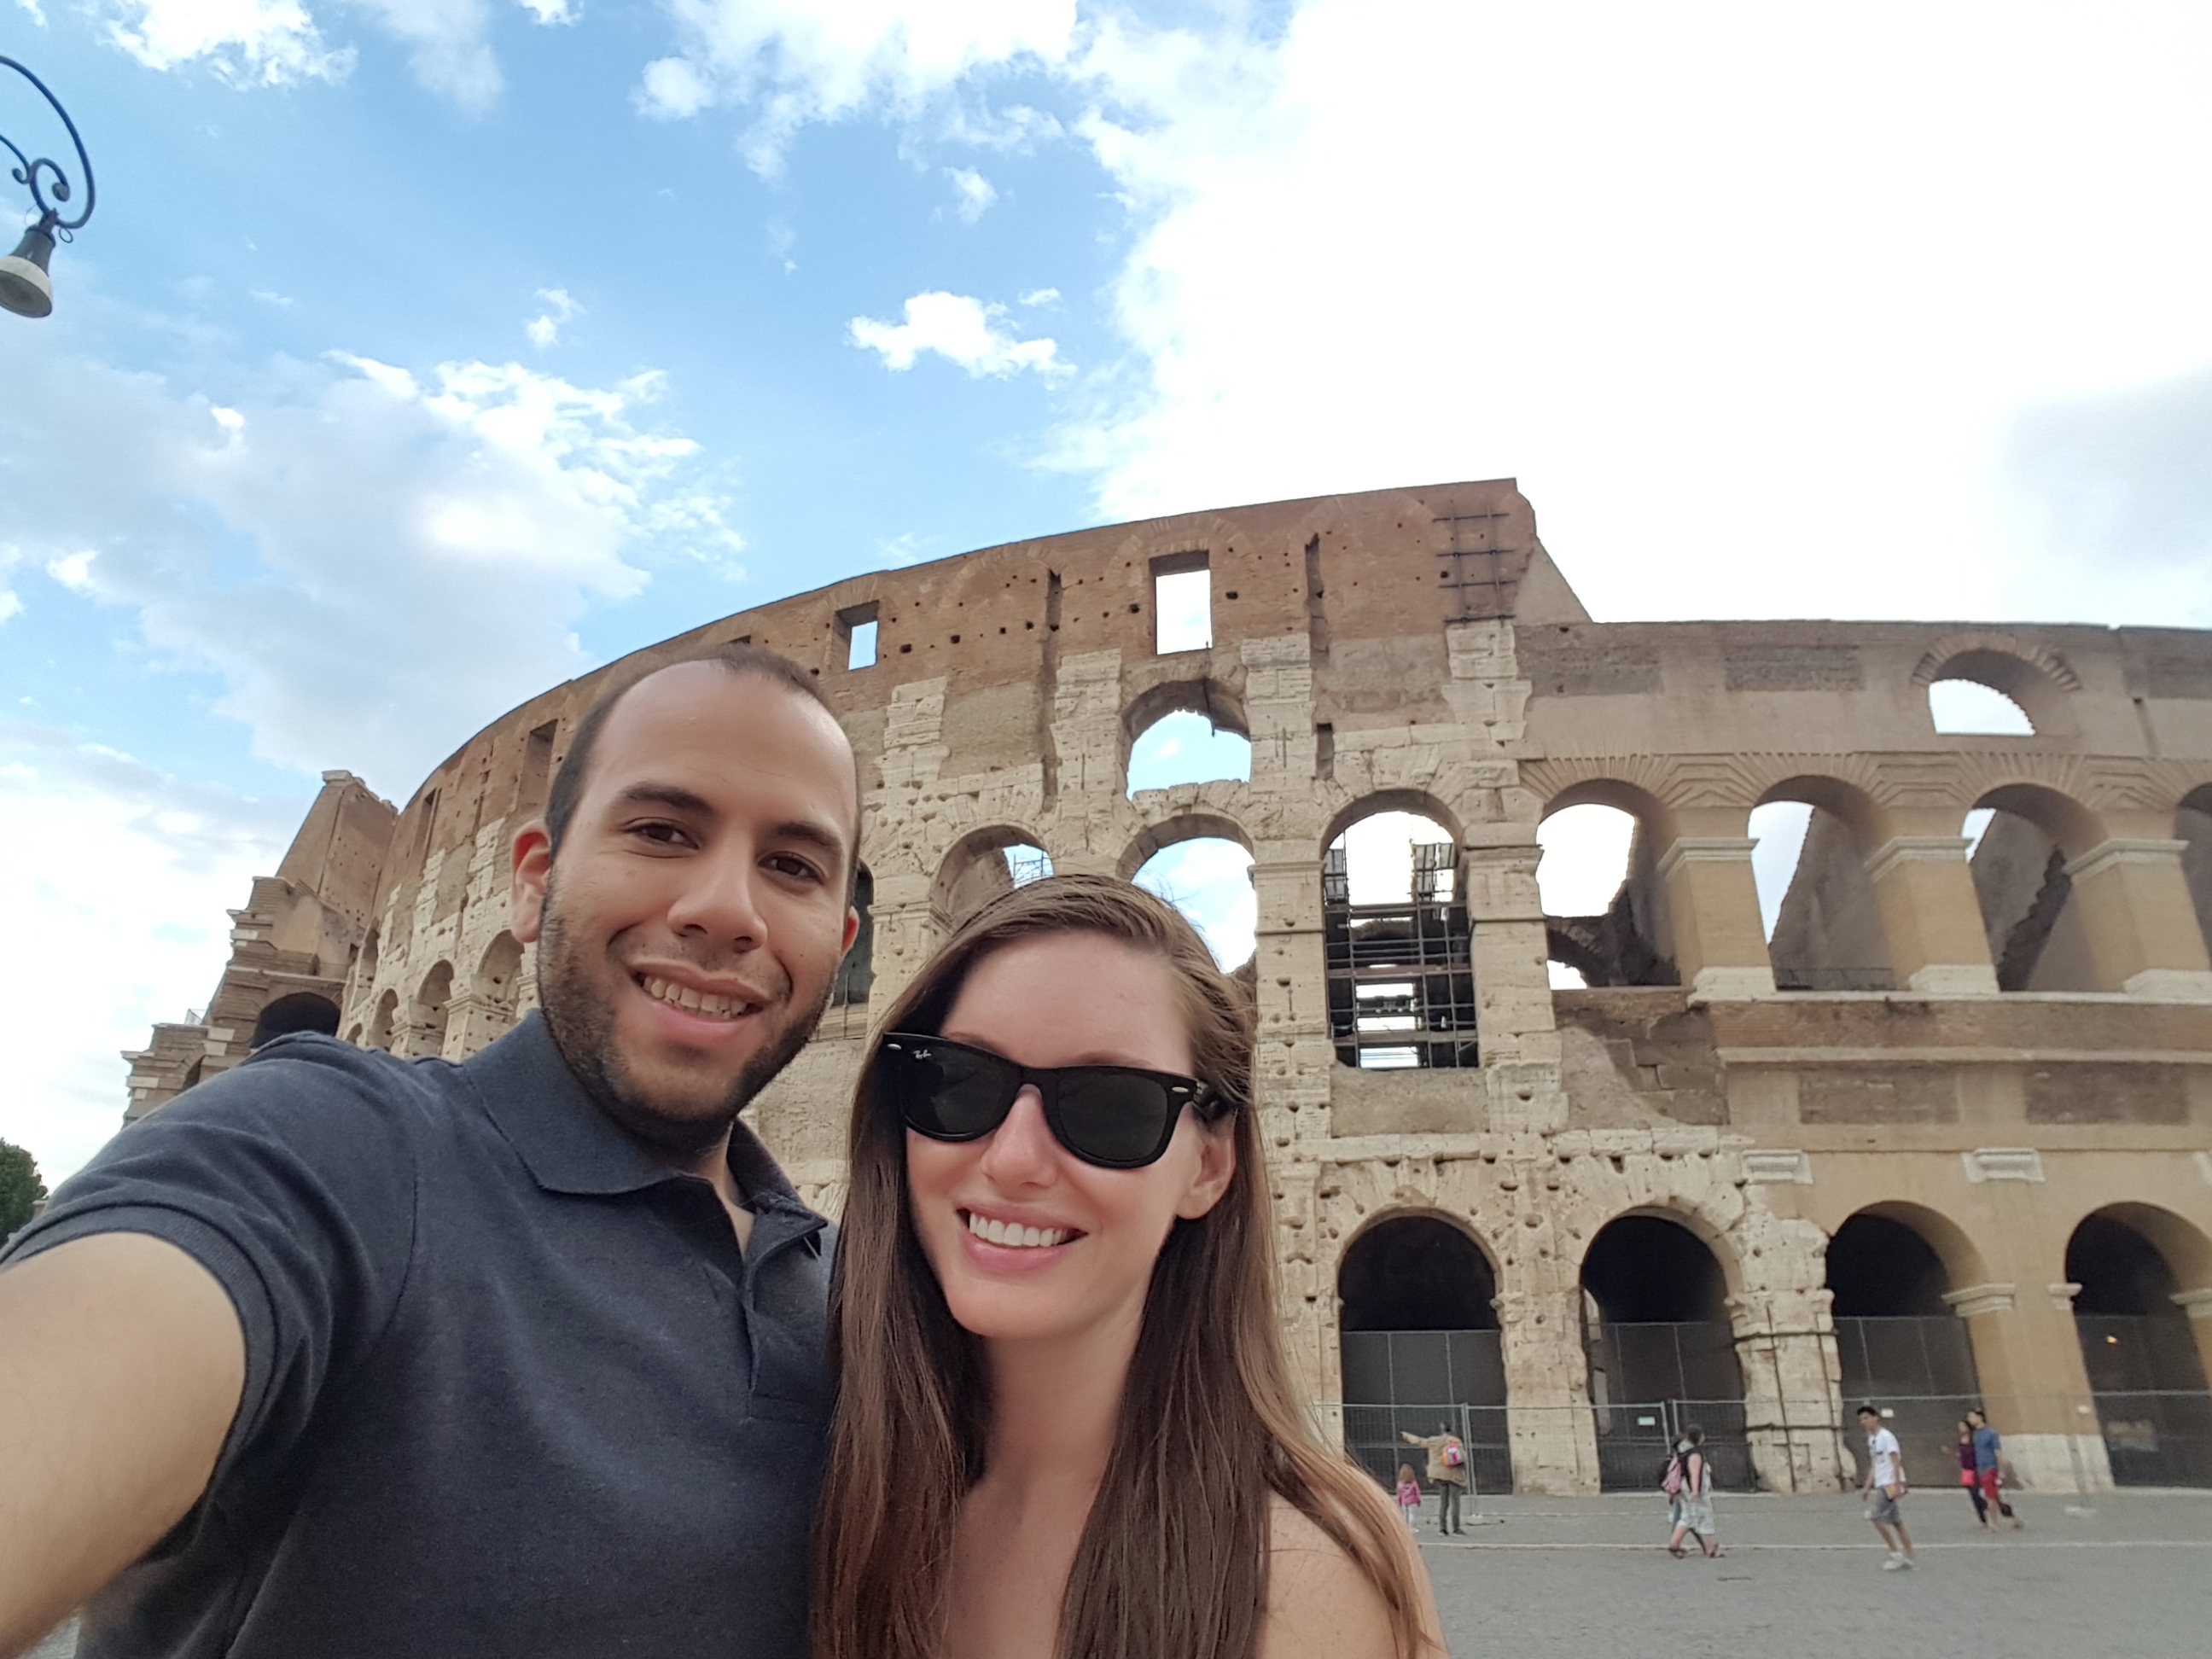 Alyssa and Michael in front of the Rome Colosseum